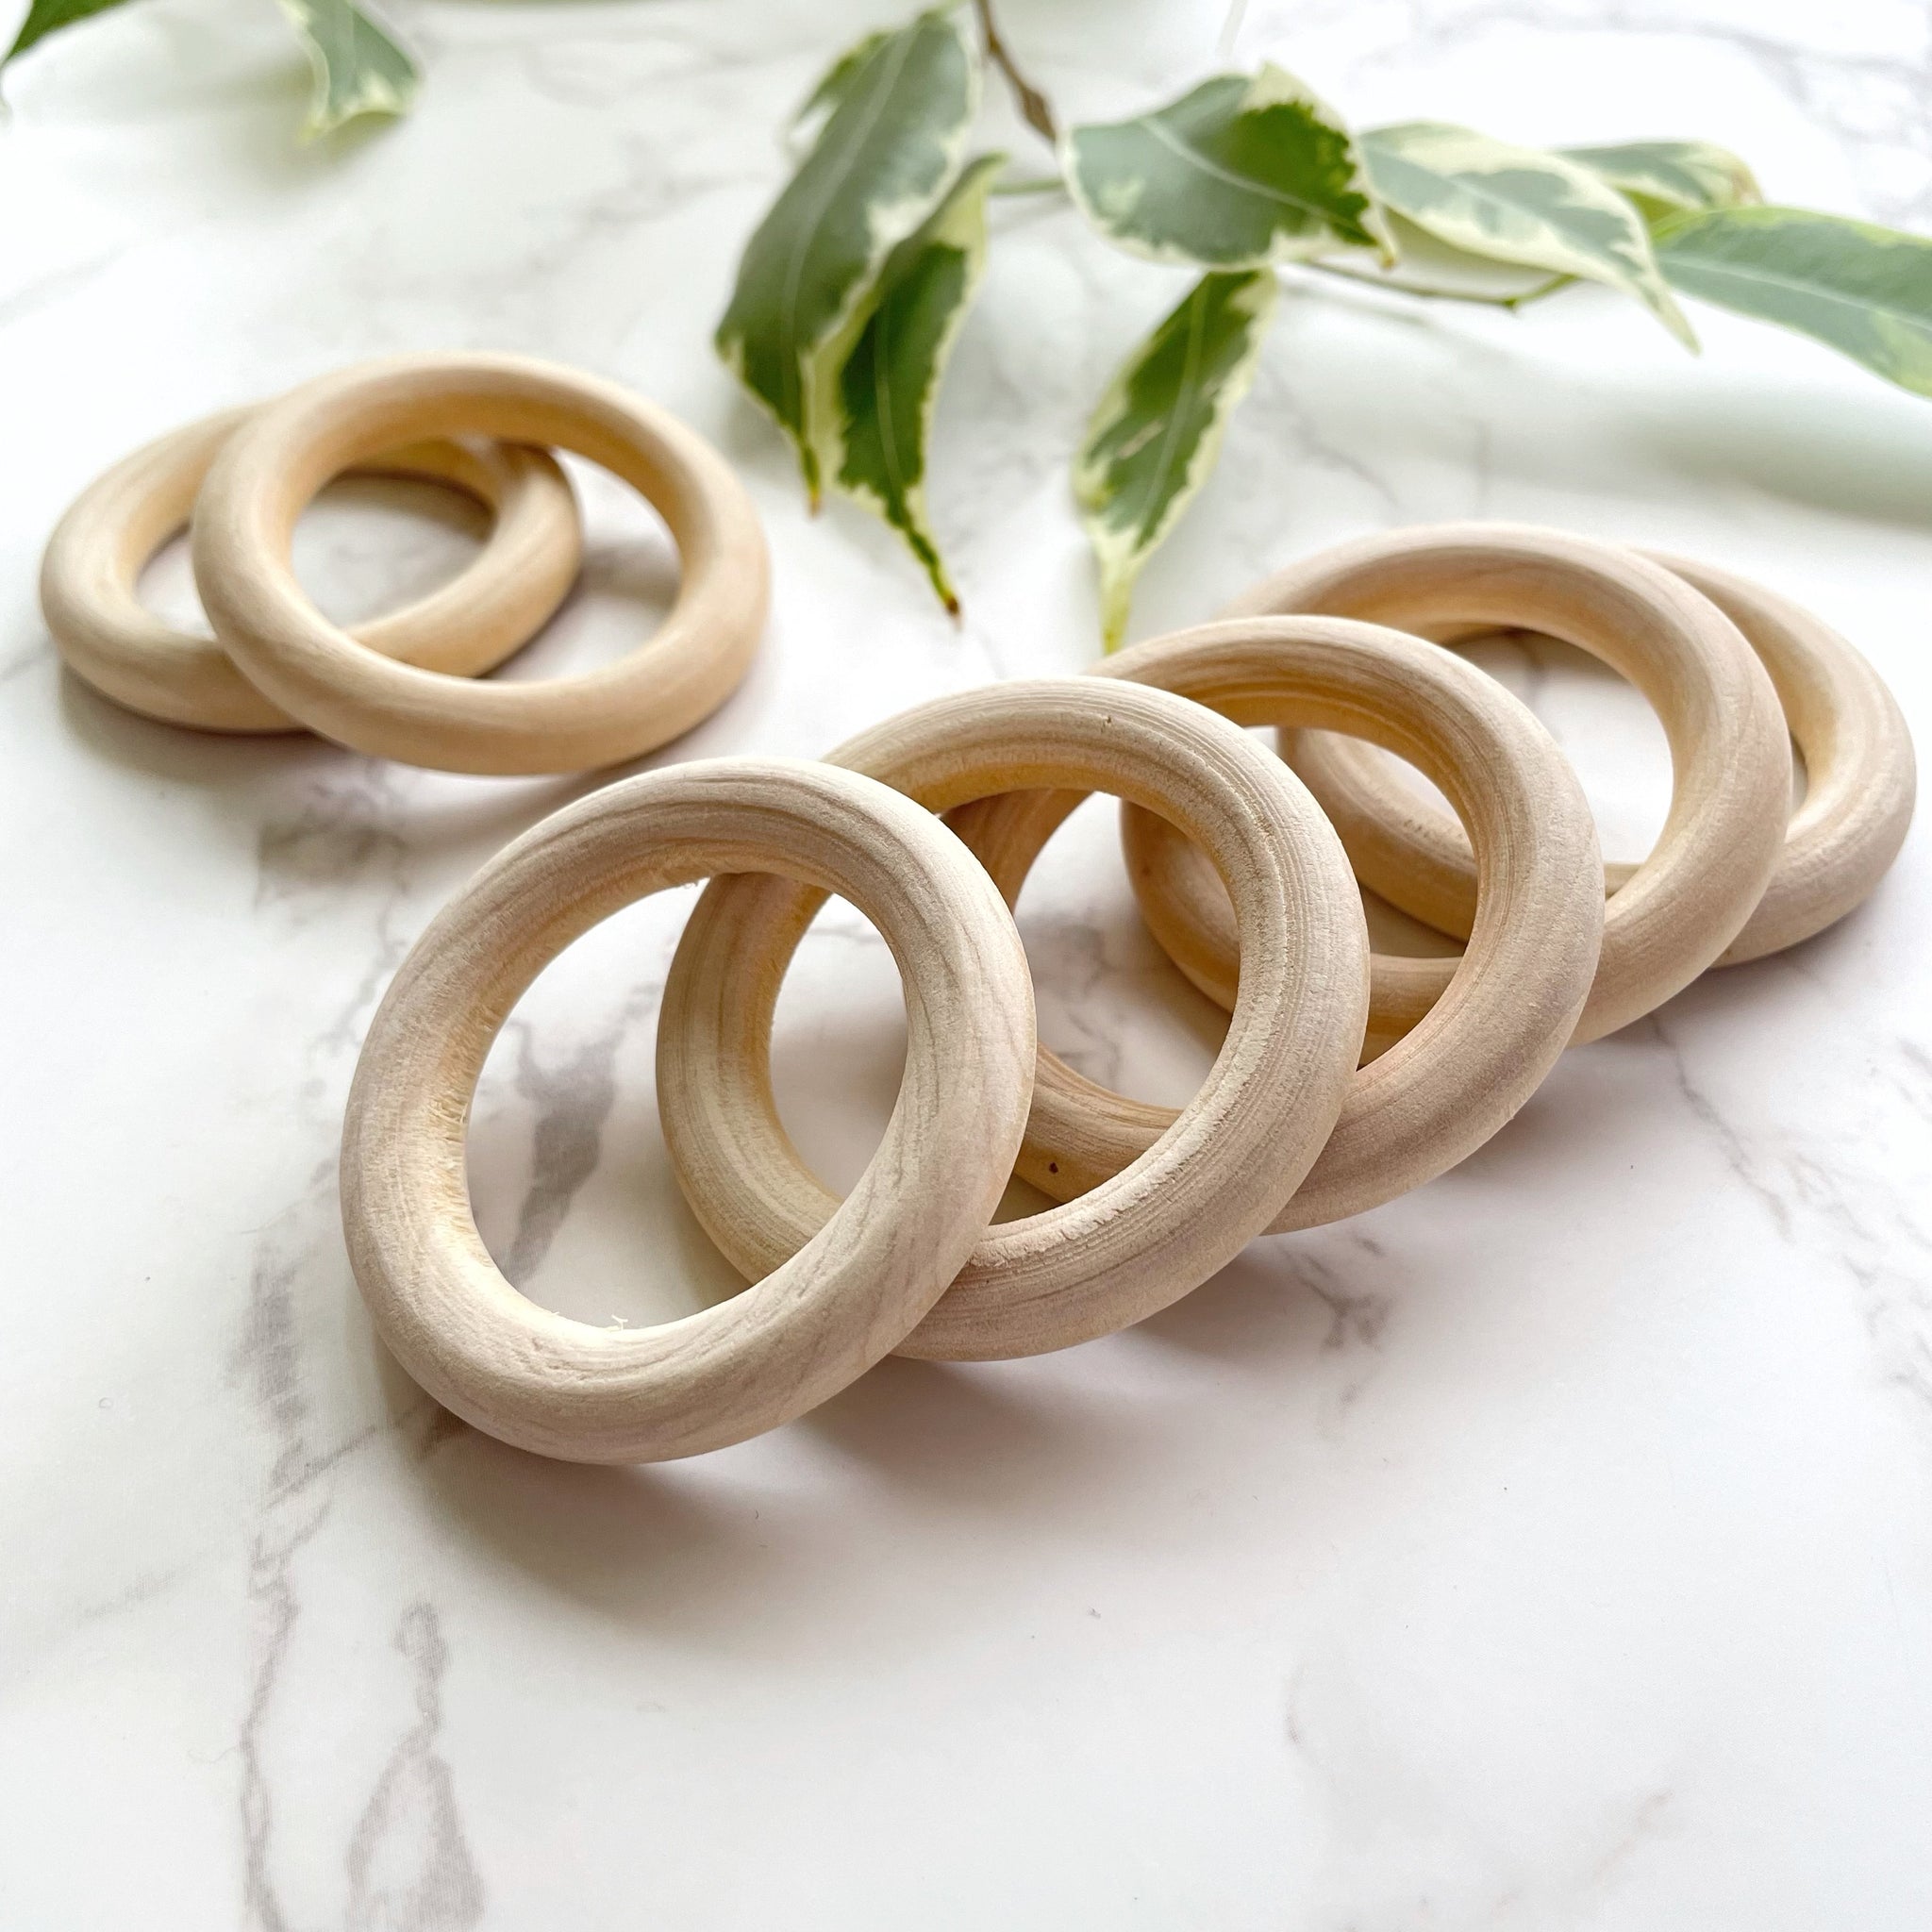 Wood Rings for Crafts 3 Inch, Pack of 5 Unfinished Wooden Rings